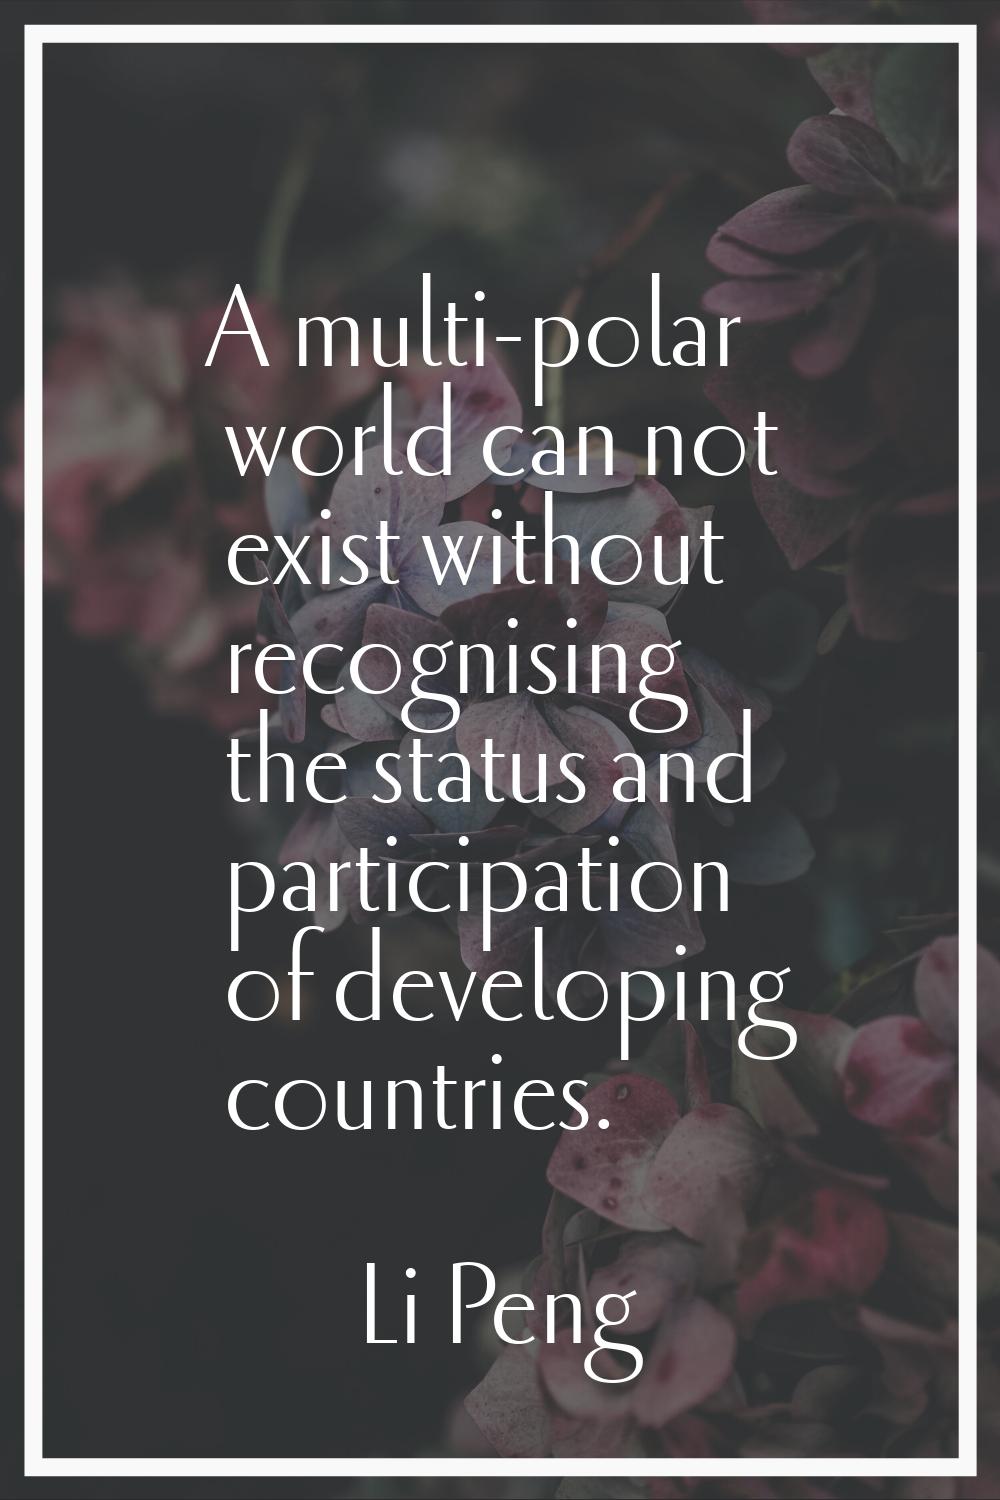 A multi-polar world can not exist without recognising the status and participation of developing co